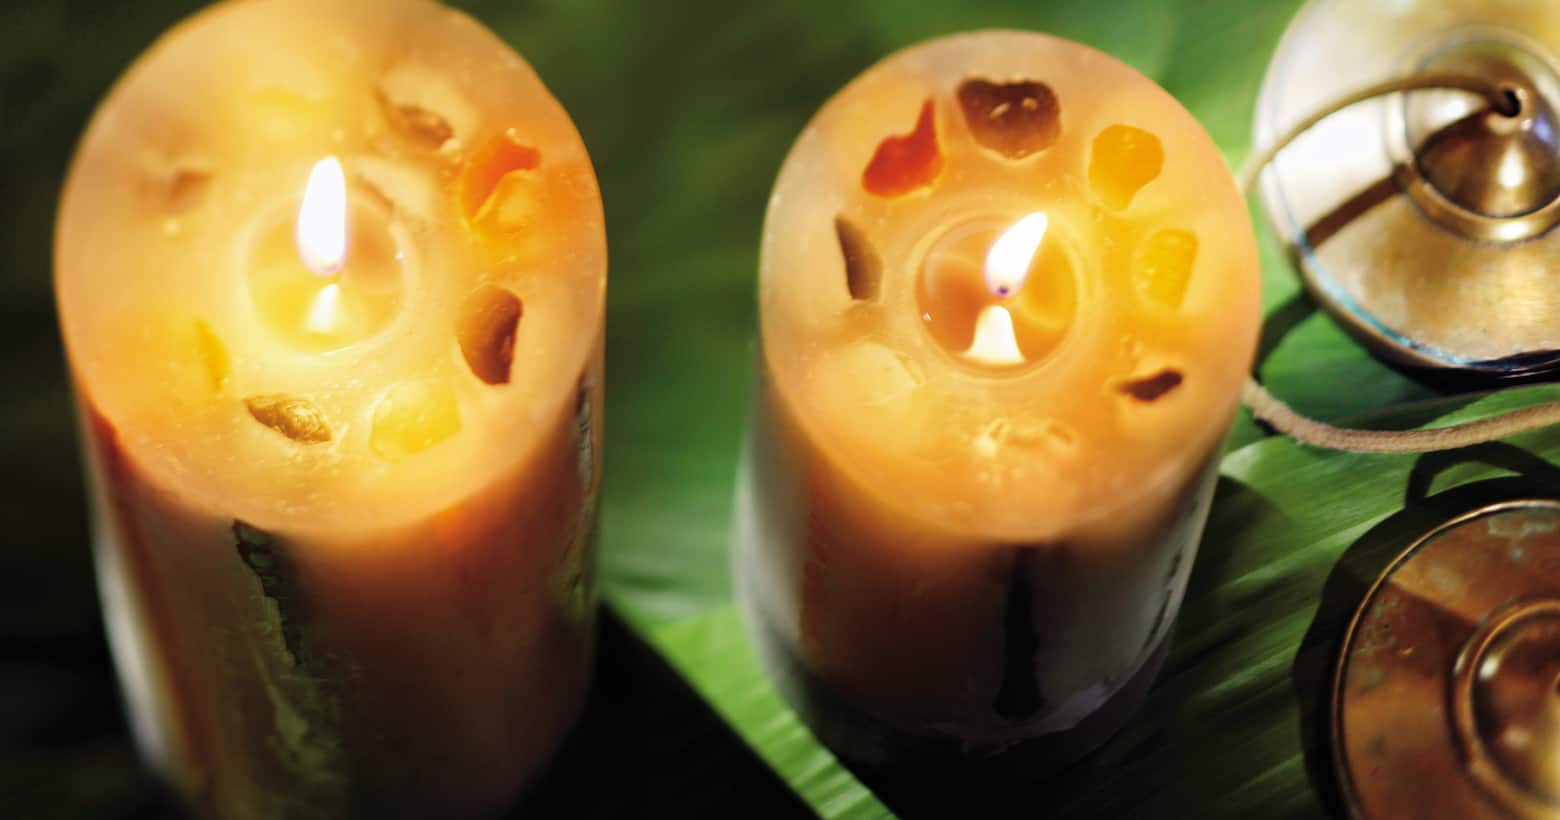 two lighted candles